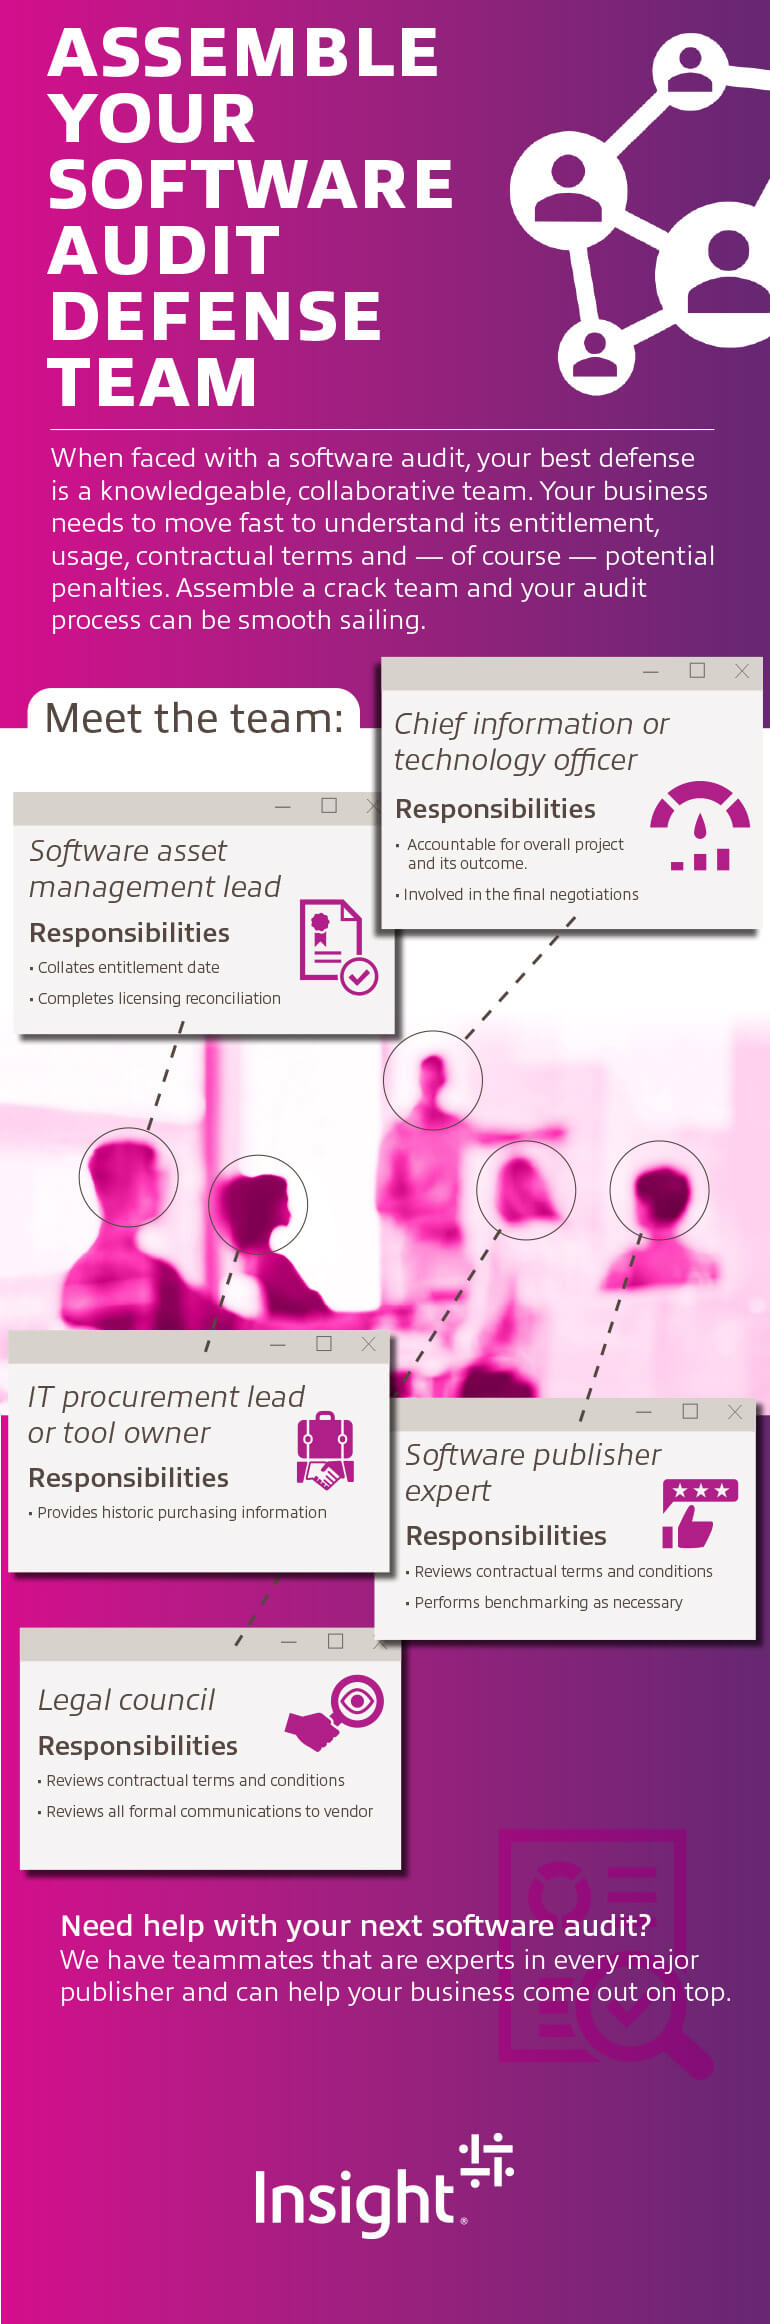 Assemble Your Software Audit Defense Team infographic